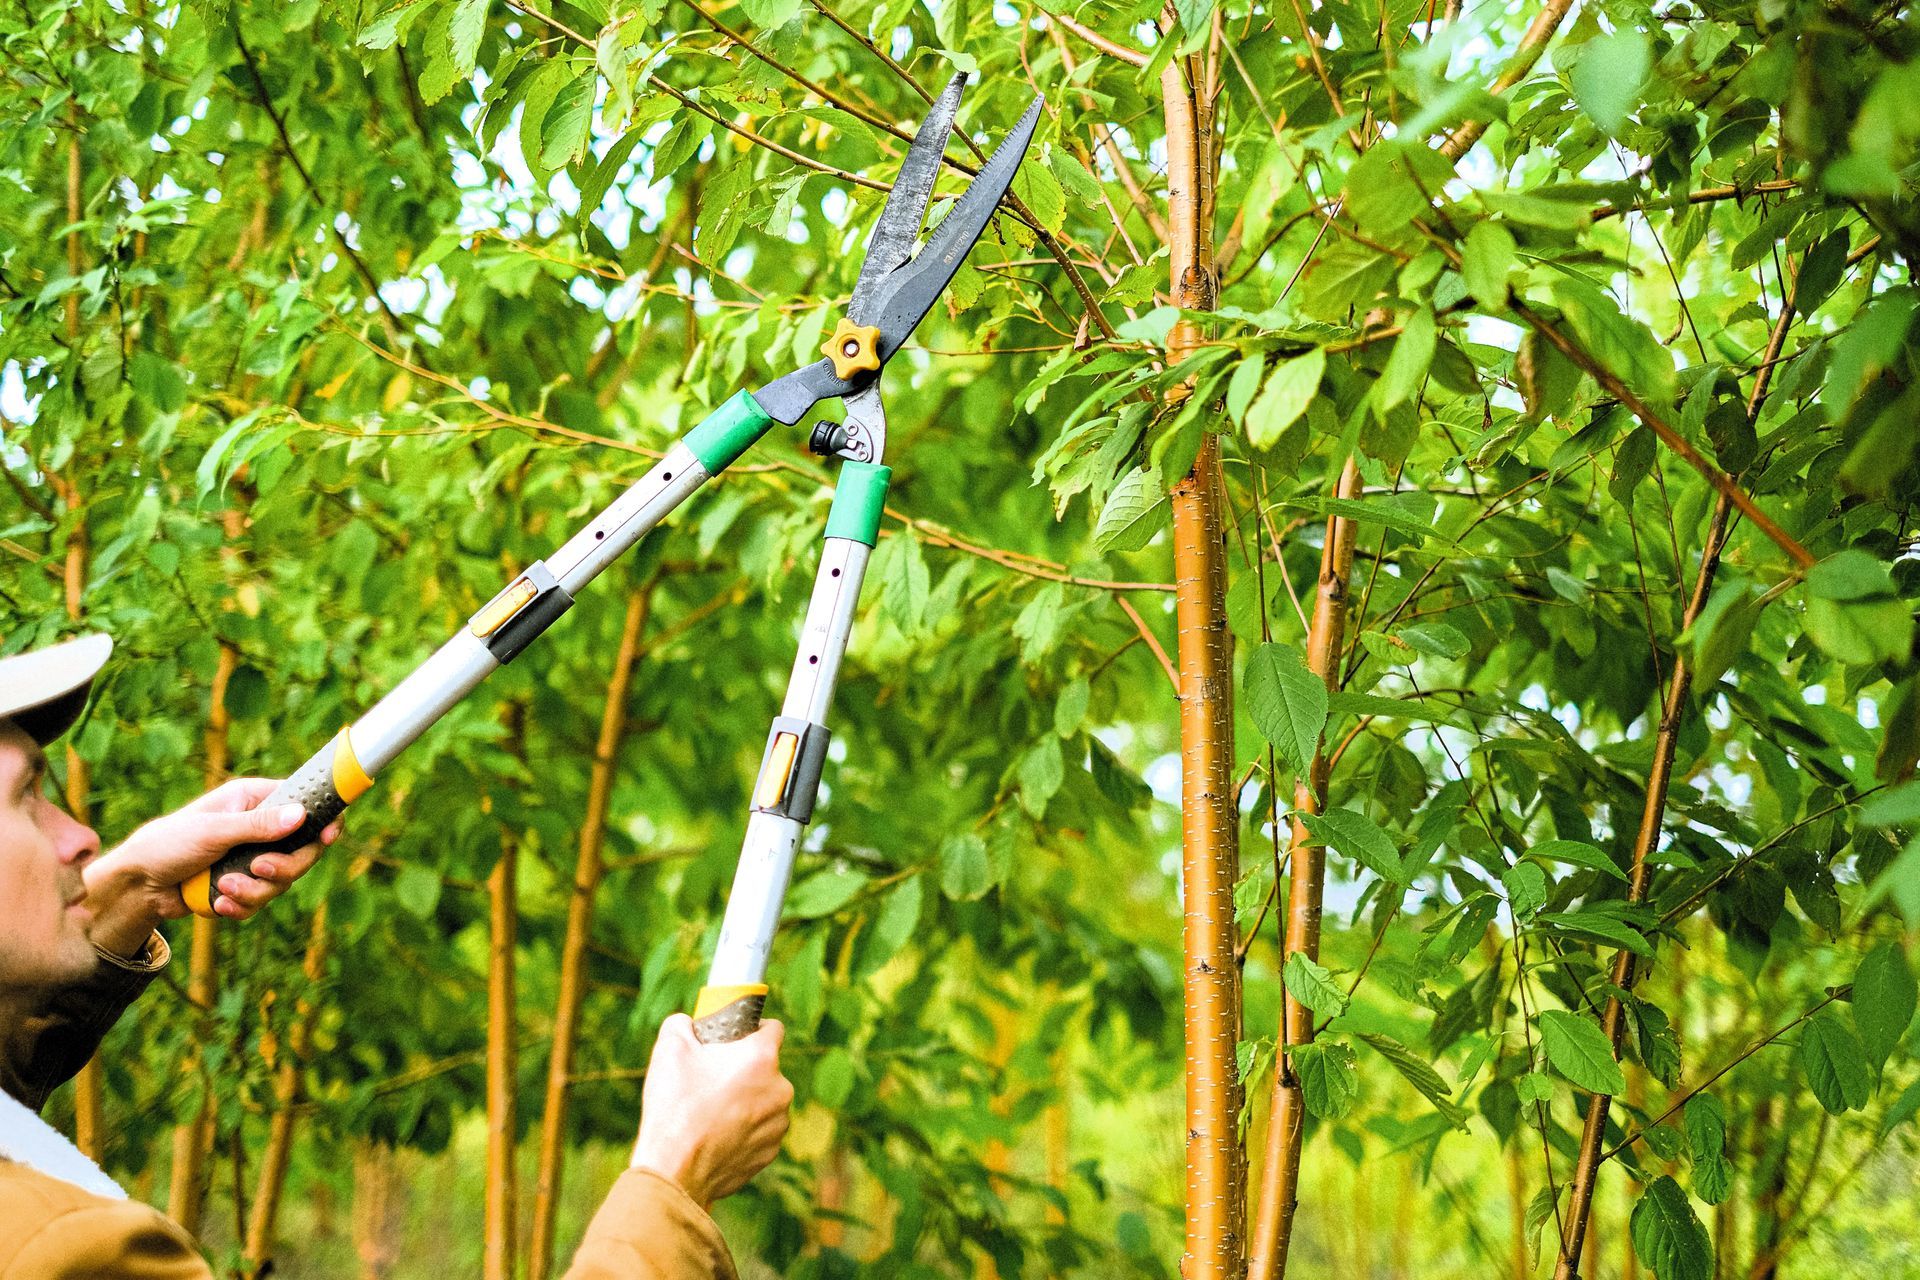 Skilled gardener carefully pruning branches of a tree in garden.